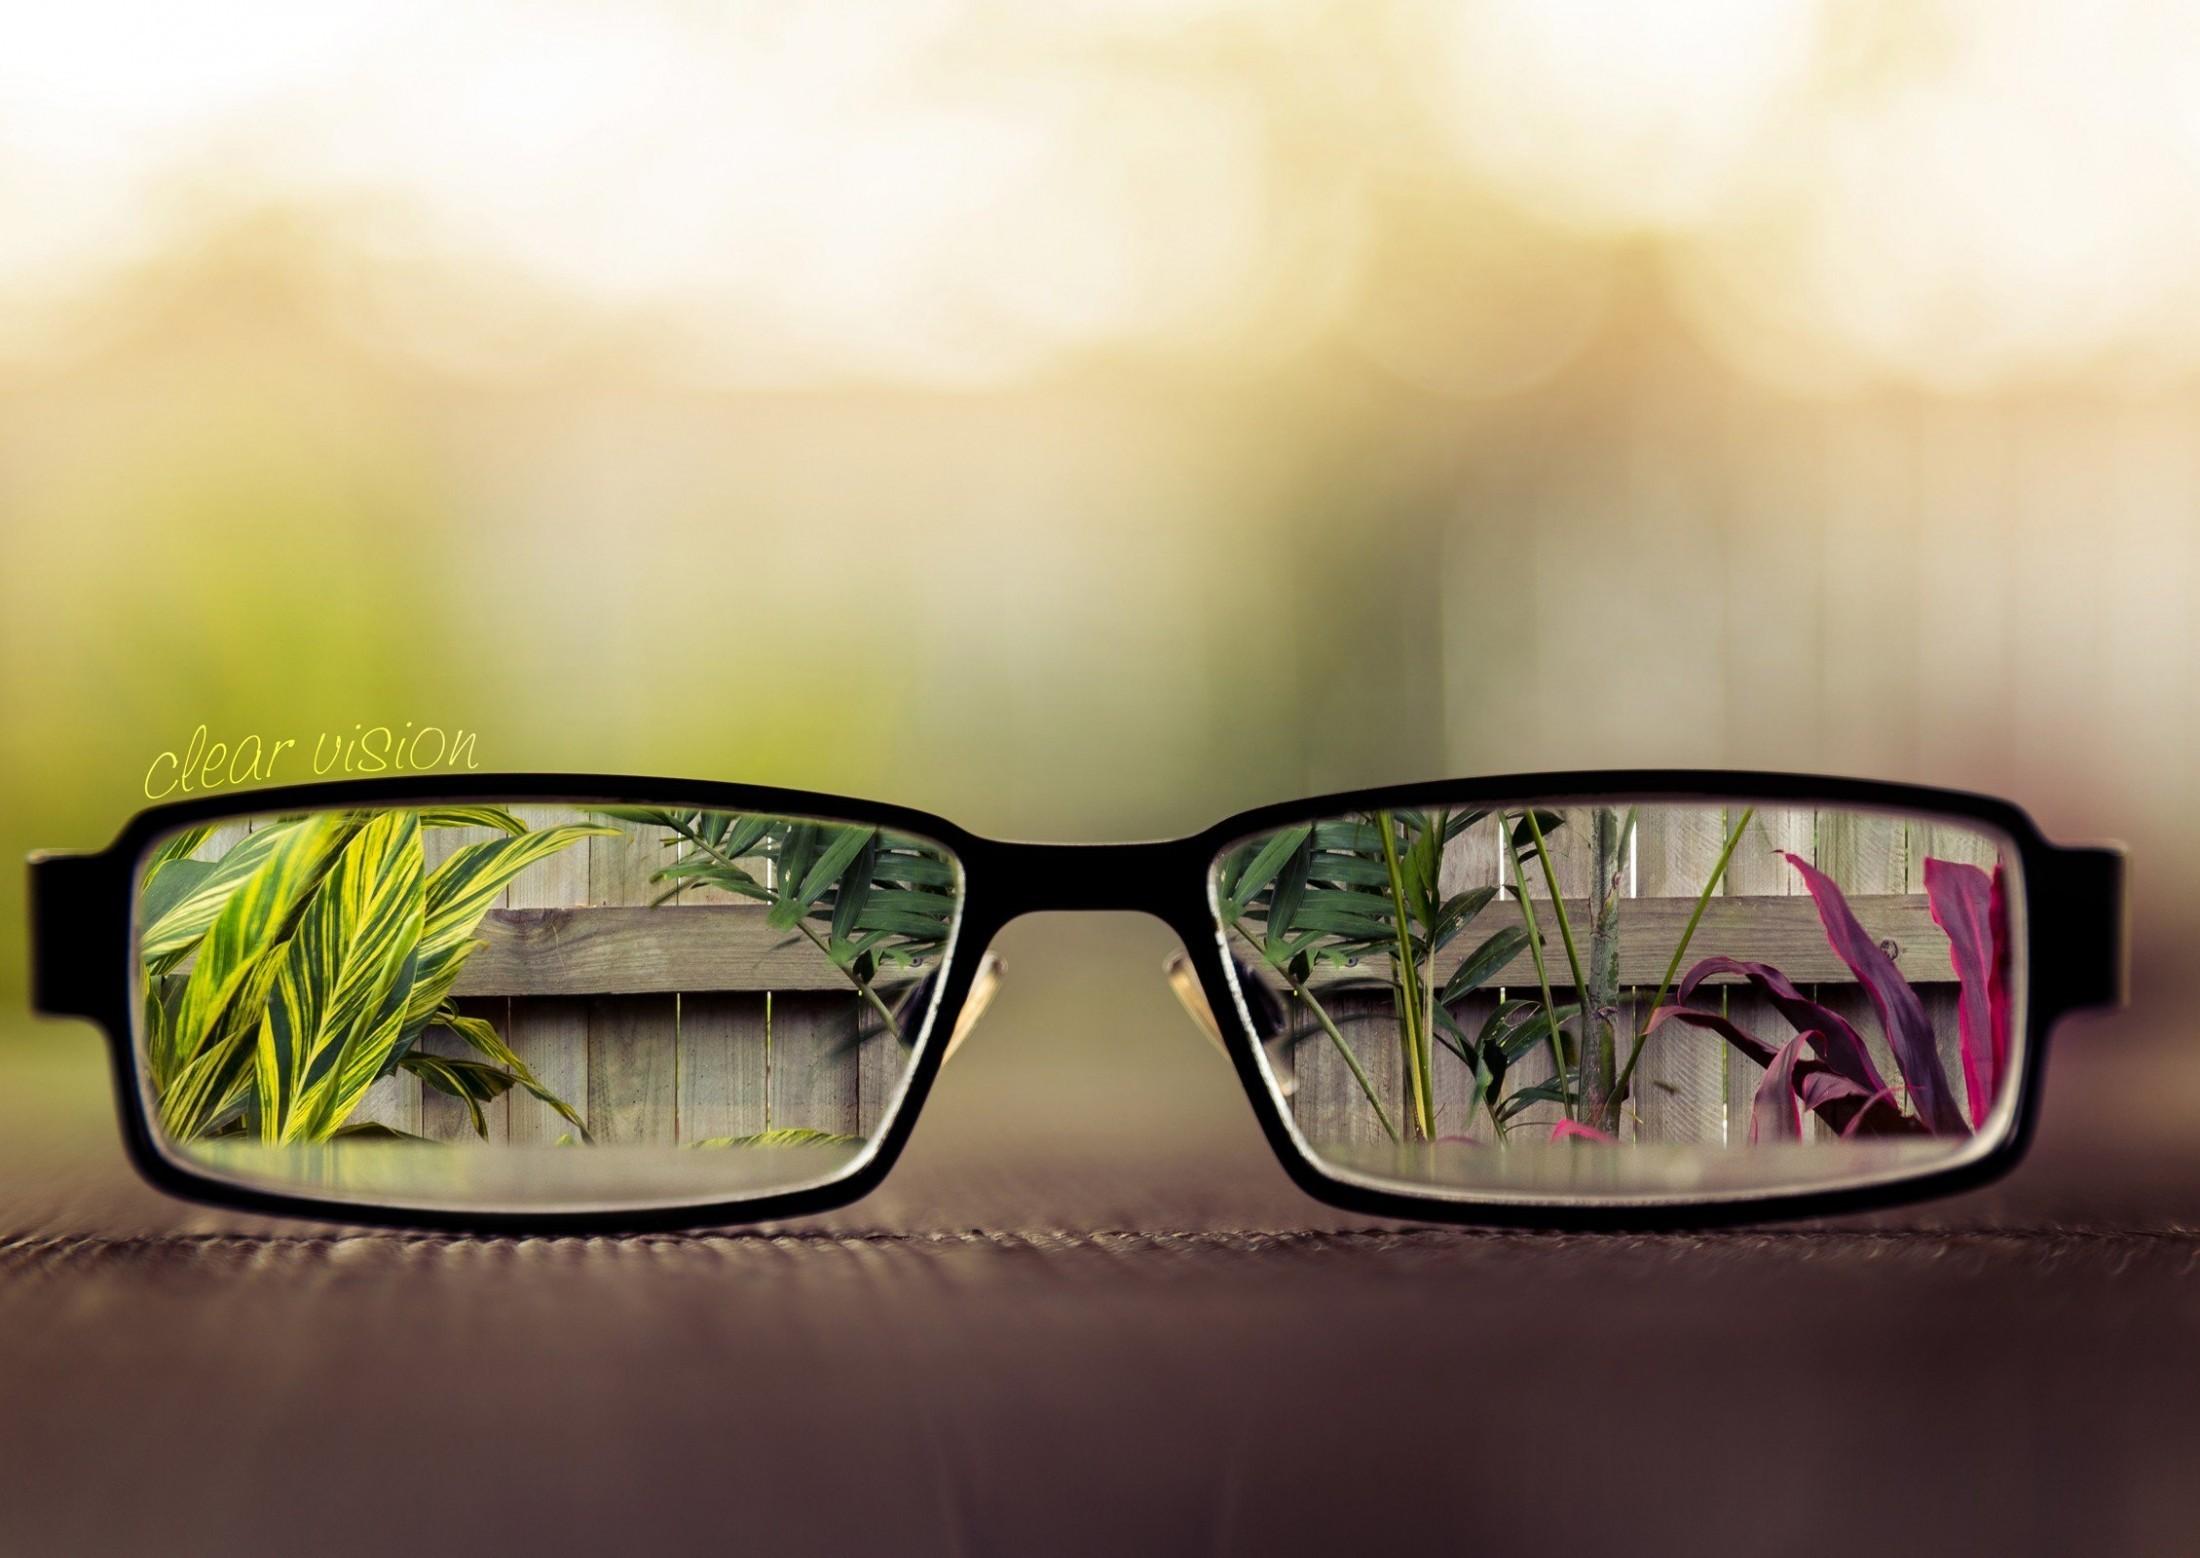 Download 2200x1558 Clear Vision, Glasses Wallpaper